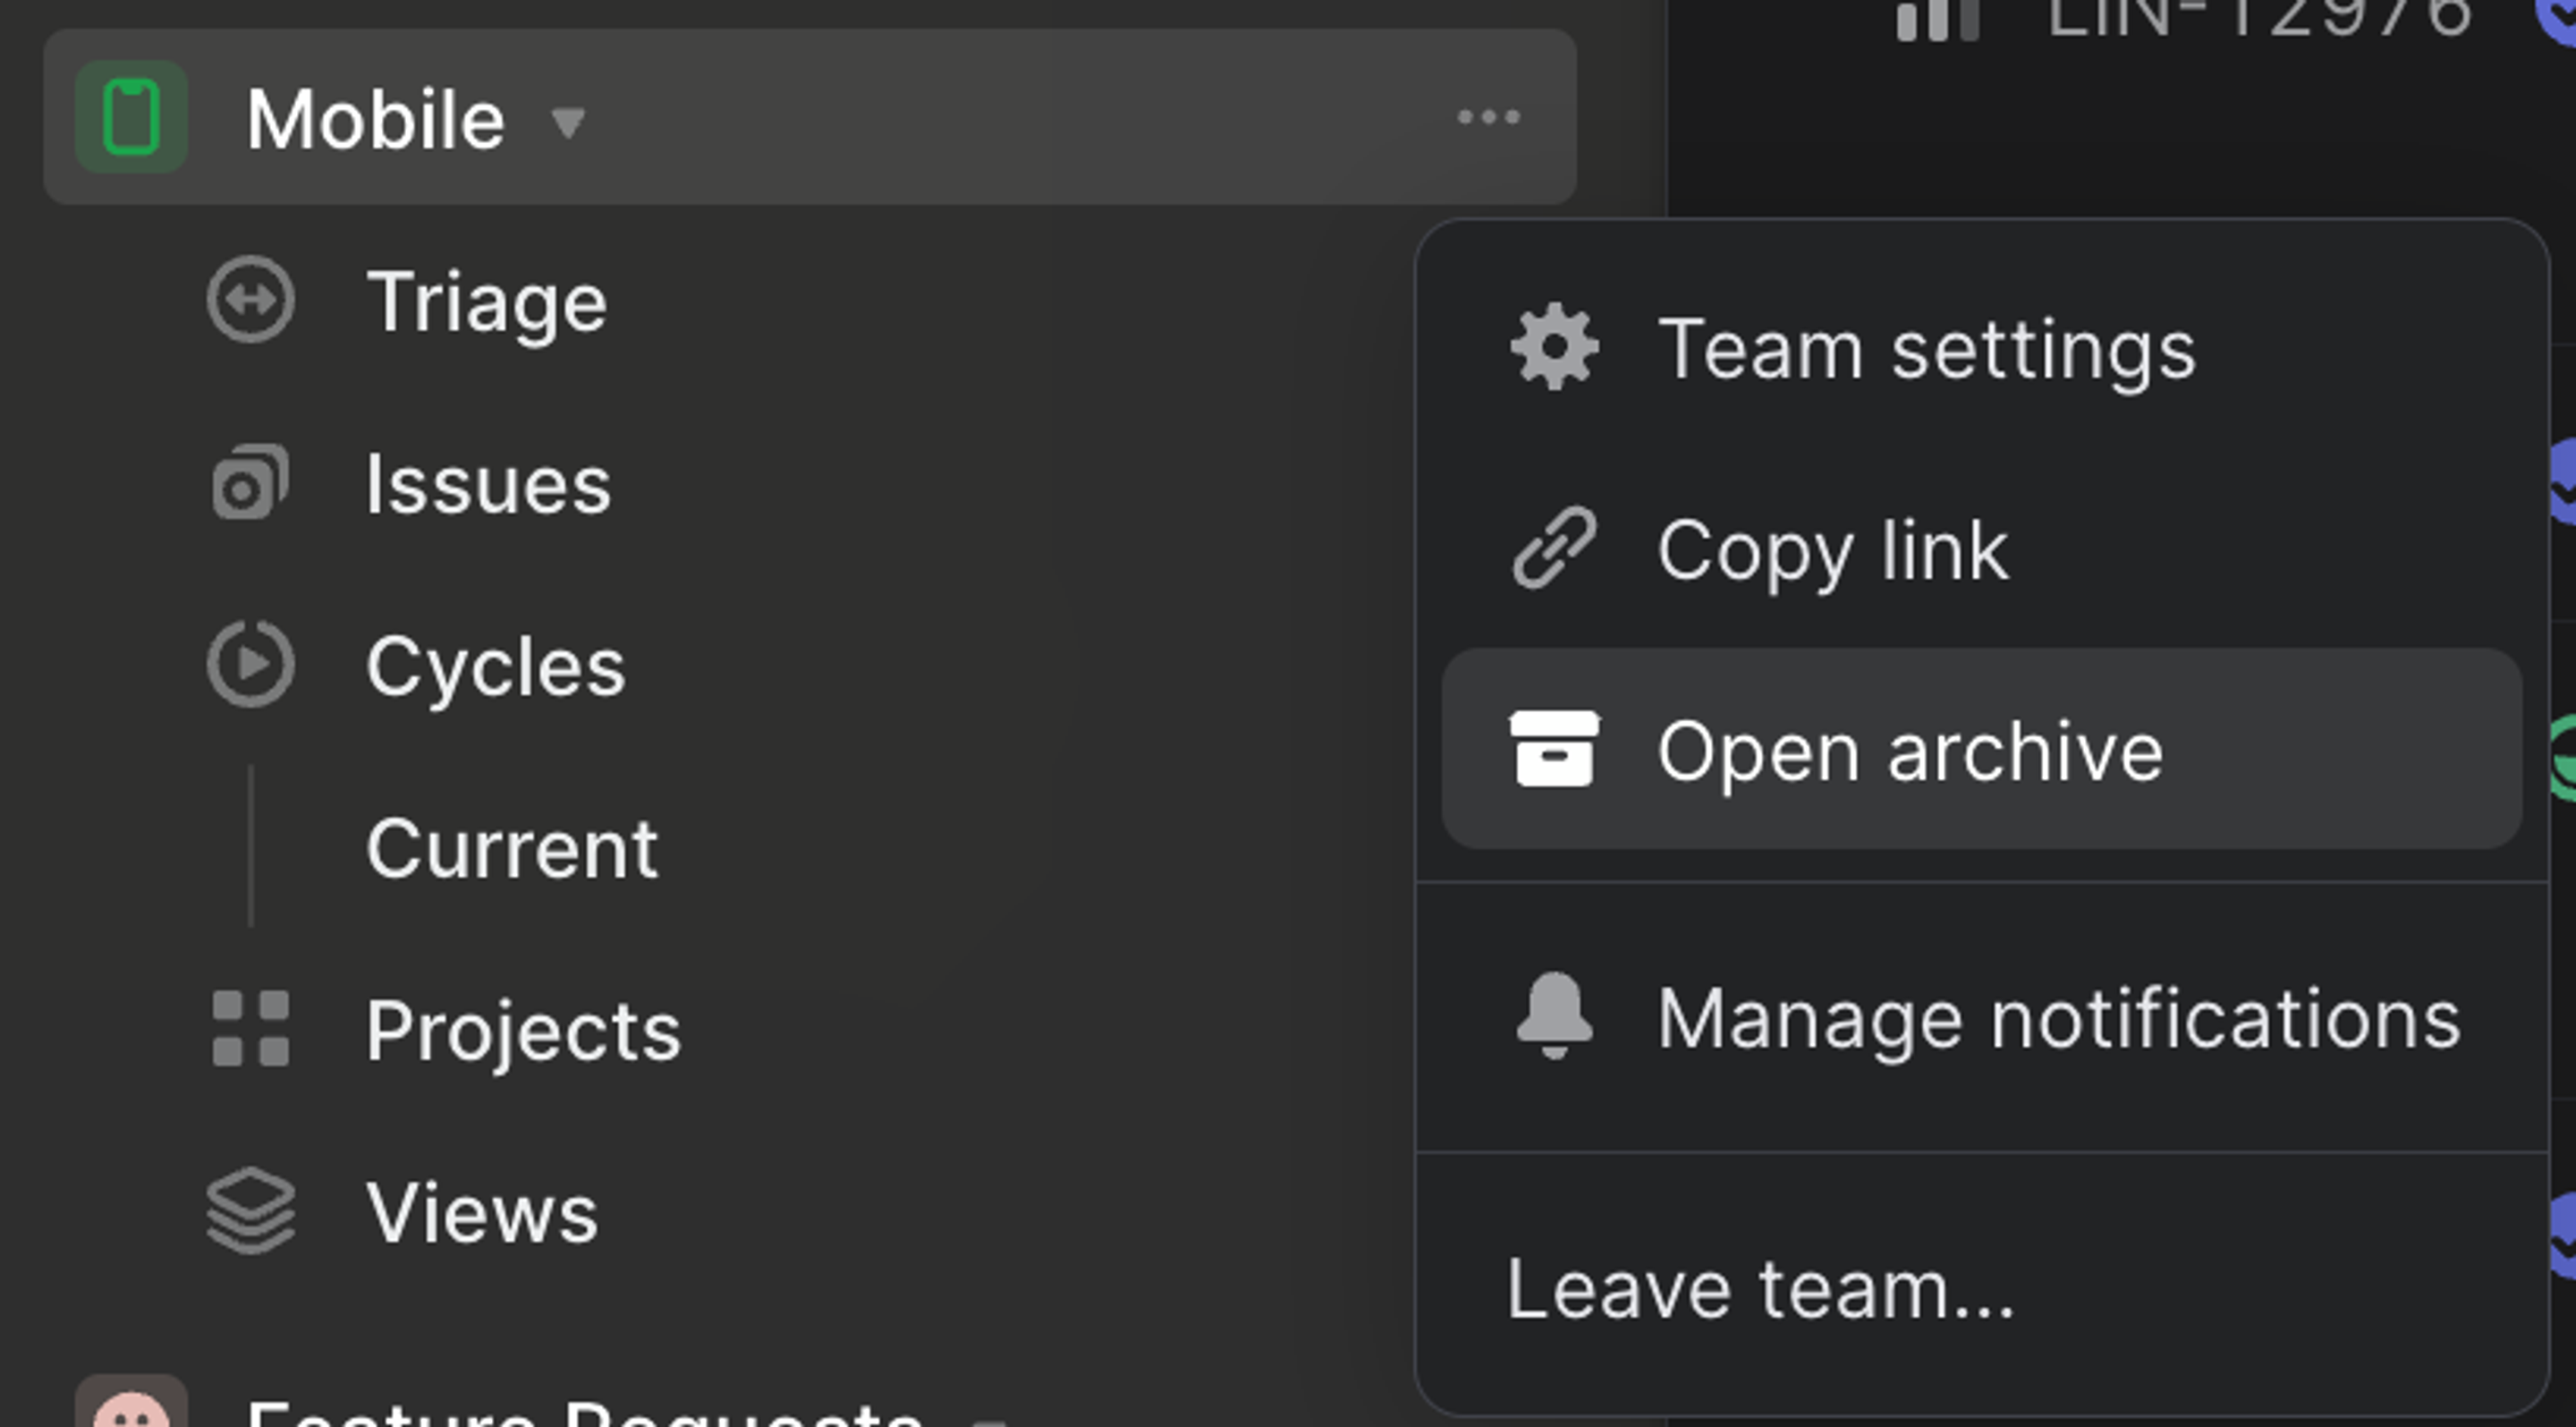 overflow menu on a team showing open archive